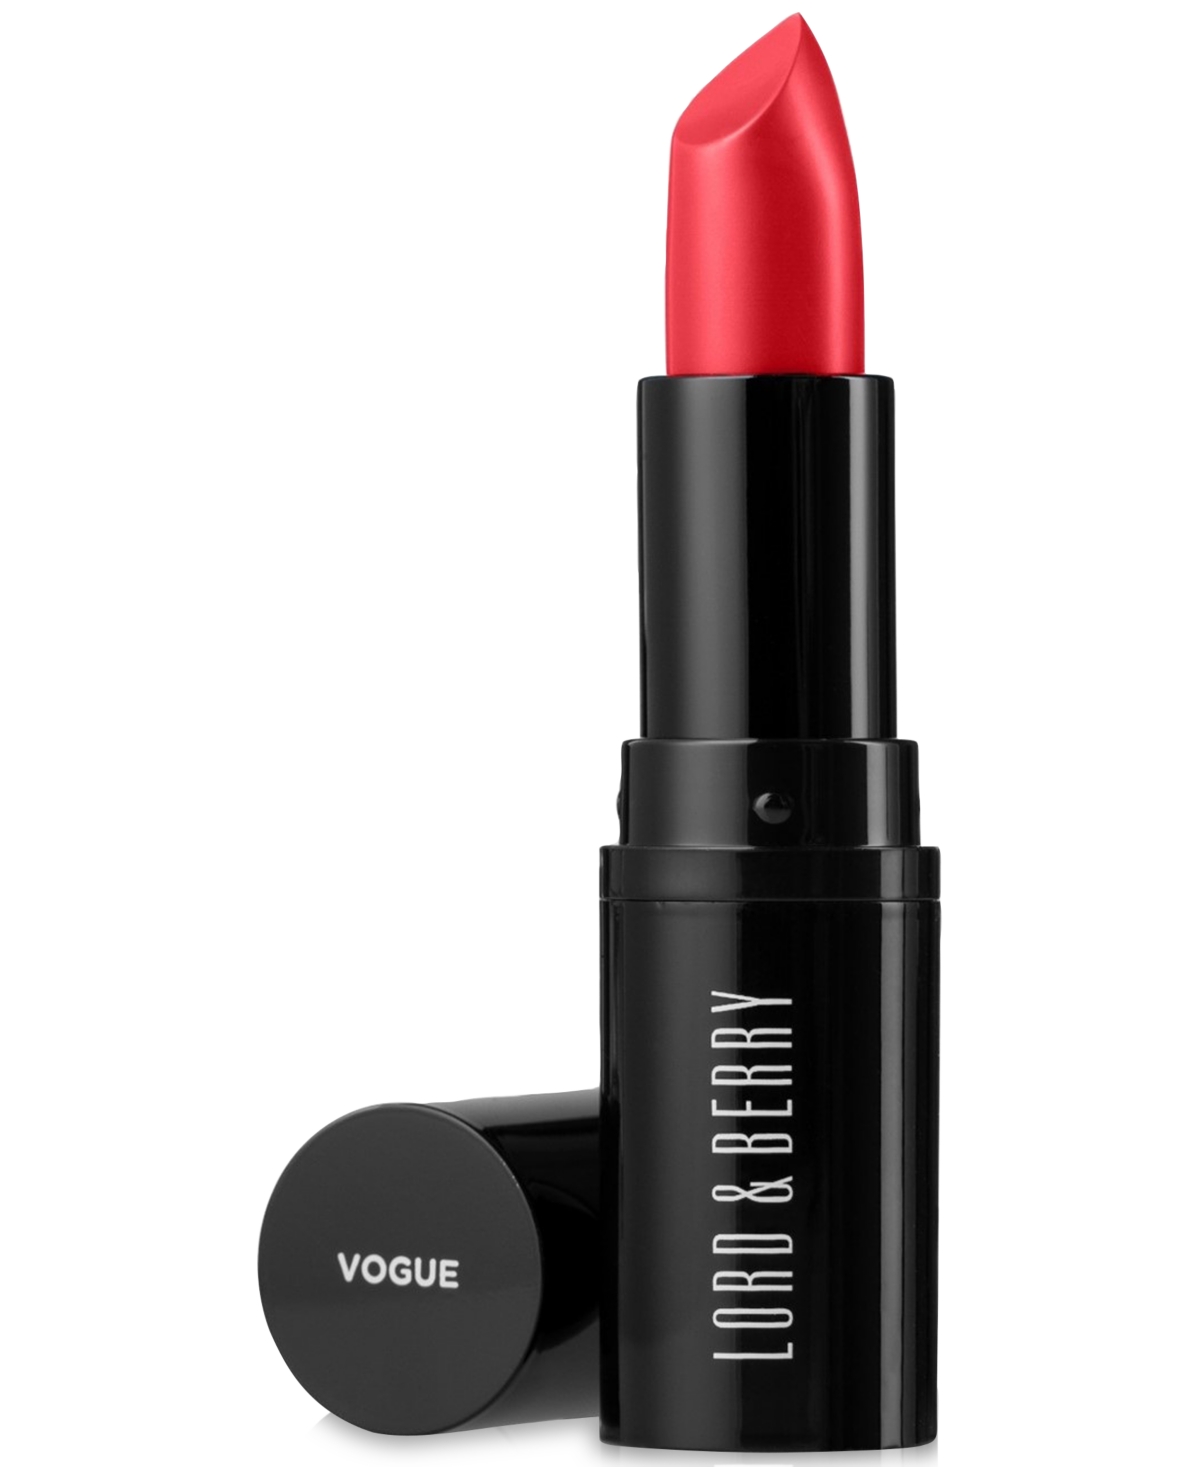 Lord & Berry Vogue Matte Lipstick In Night And Day - Neutral Rose Berry